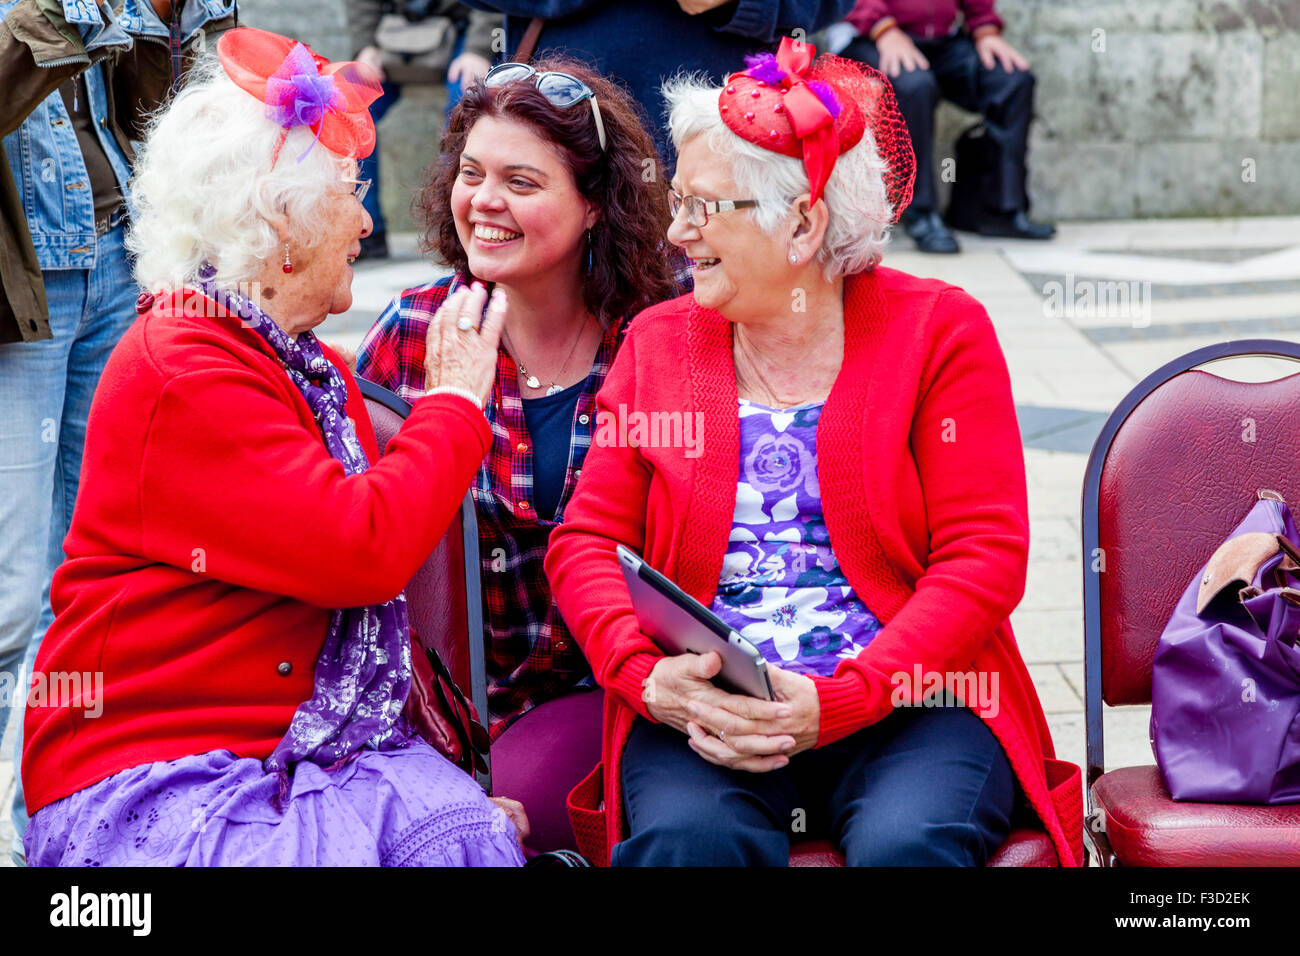 Women Of Mixed Ages Chatting At The Annual Pearly Kings and Queens Harvest Festival At The Guildhall, London, UK Stock Photo